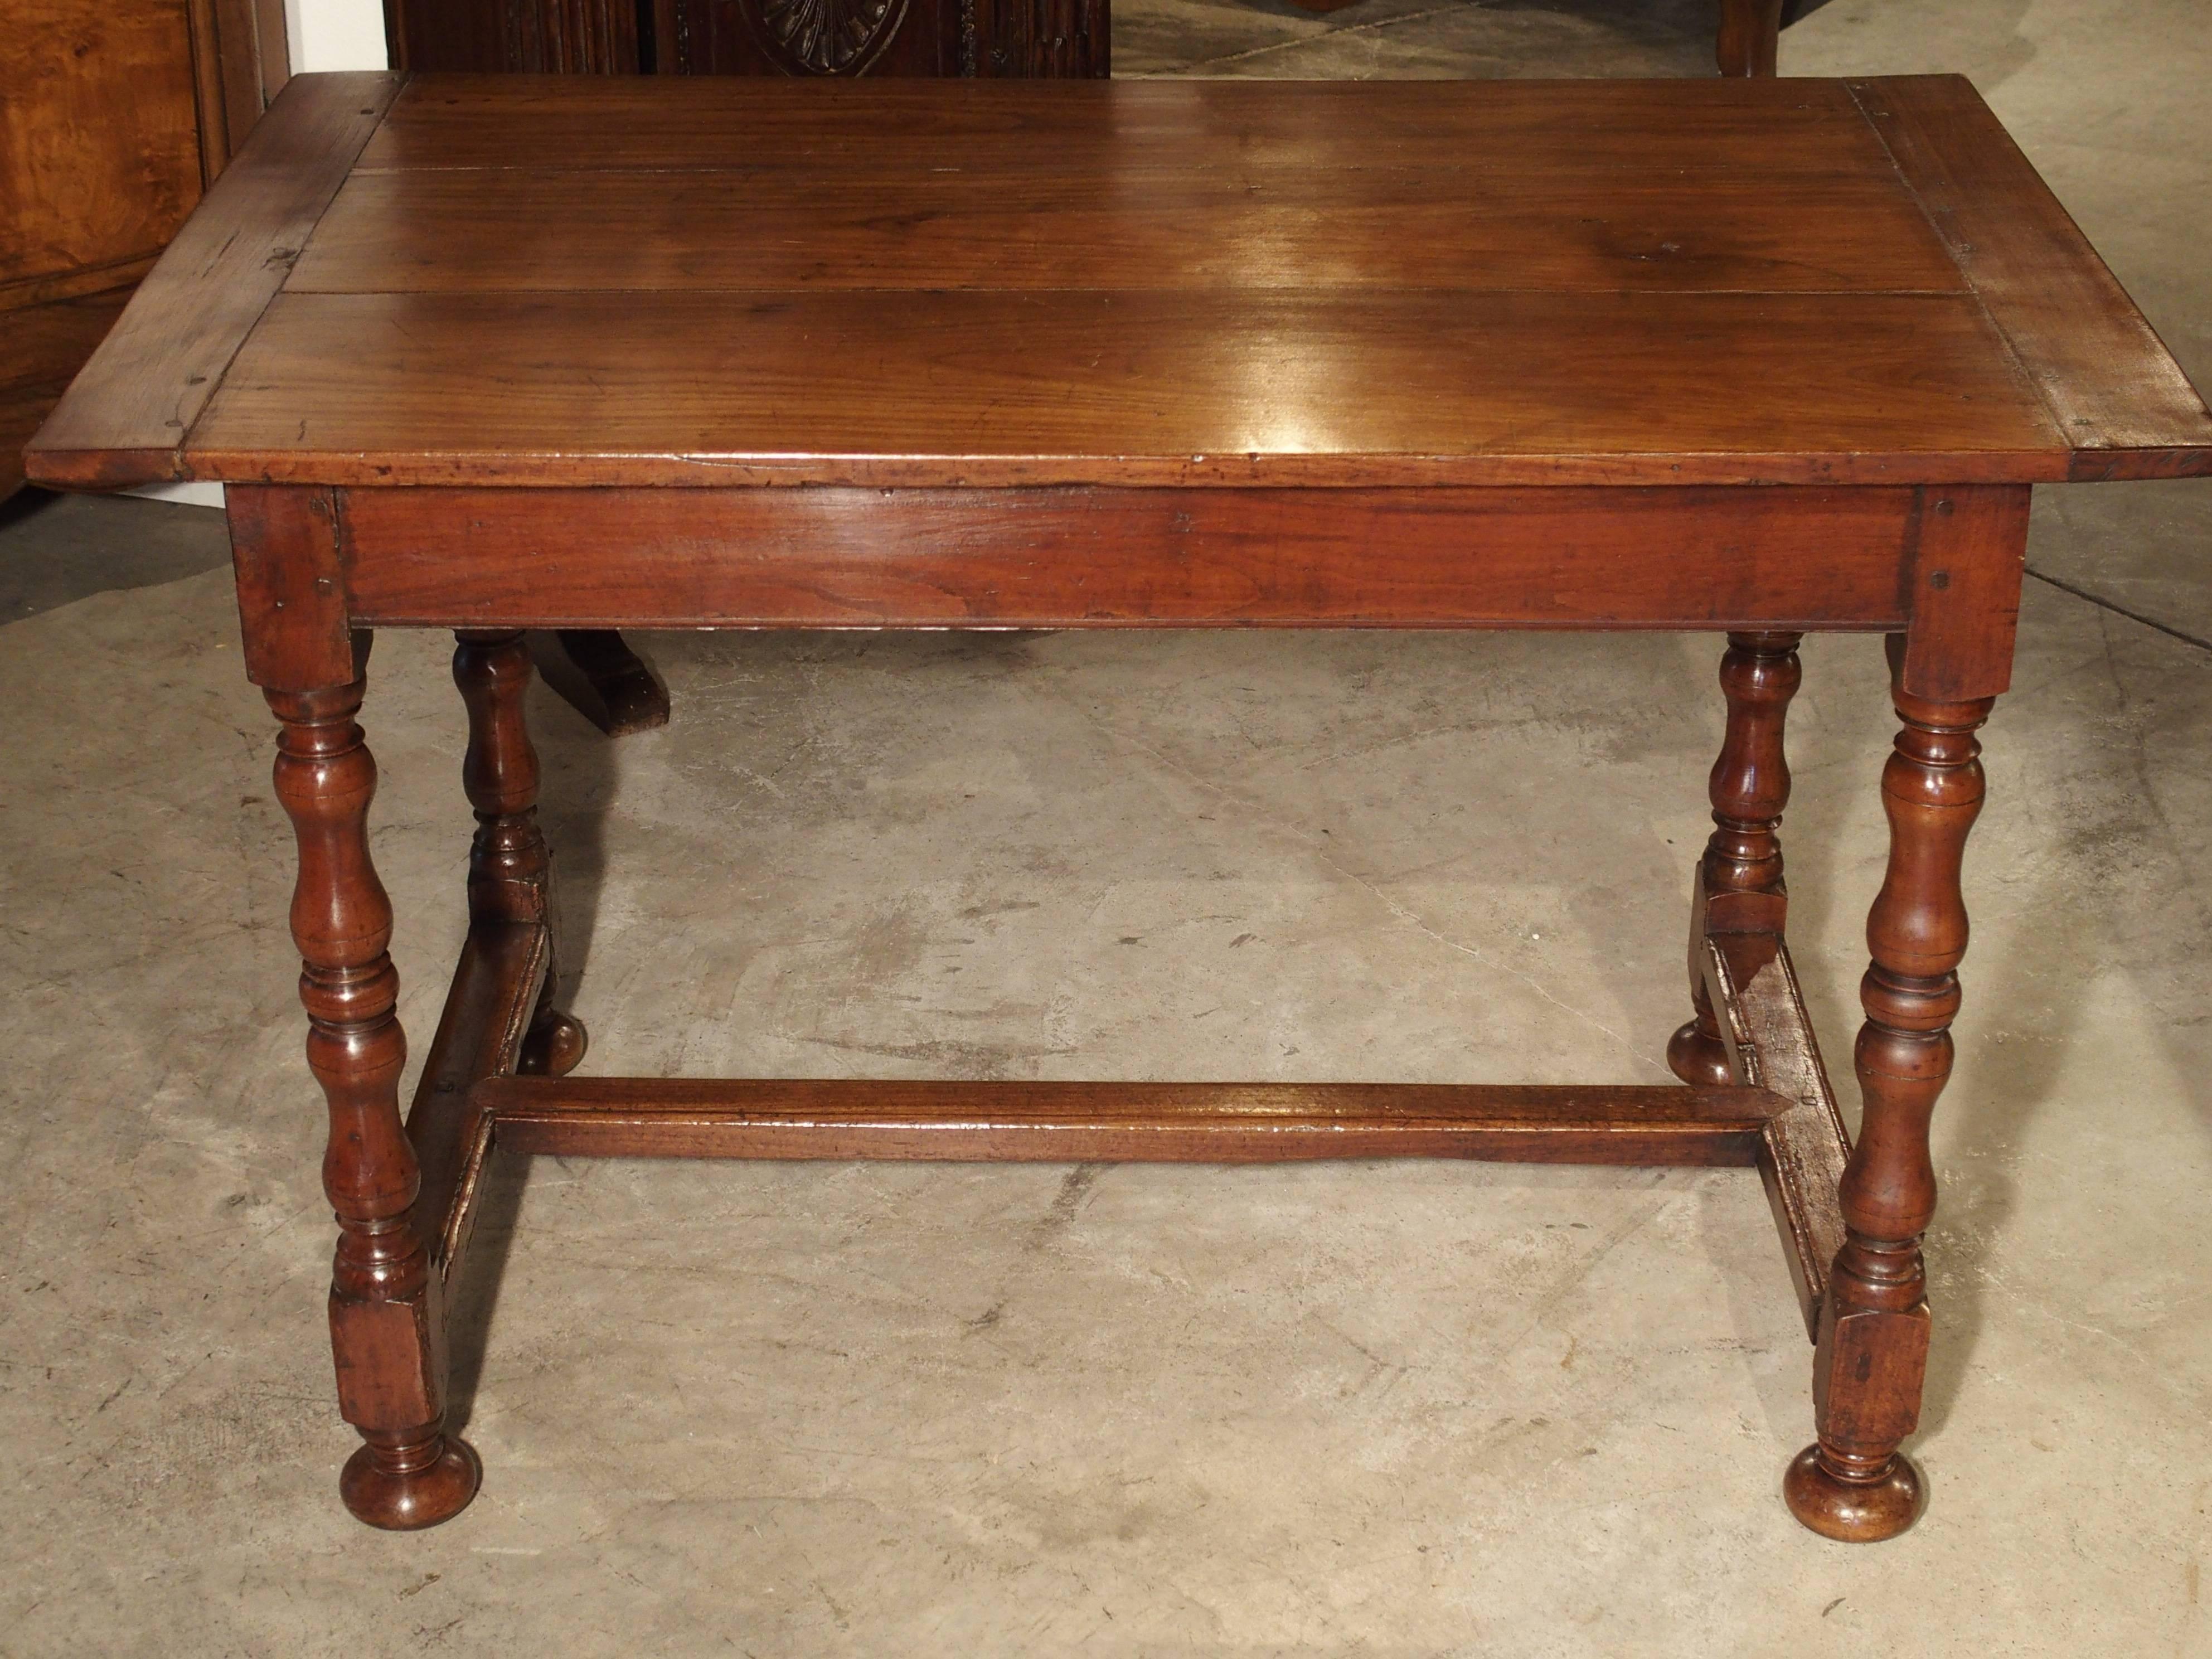 French Antique Cherry and Walnut Wood Side Table, 18th Century